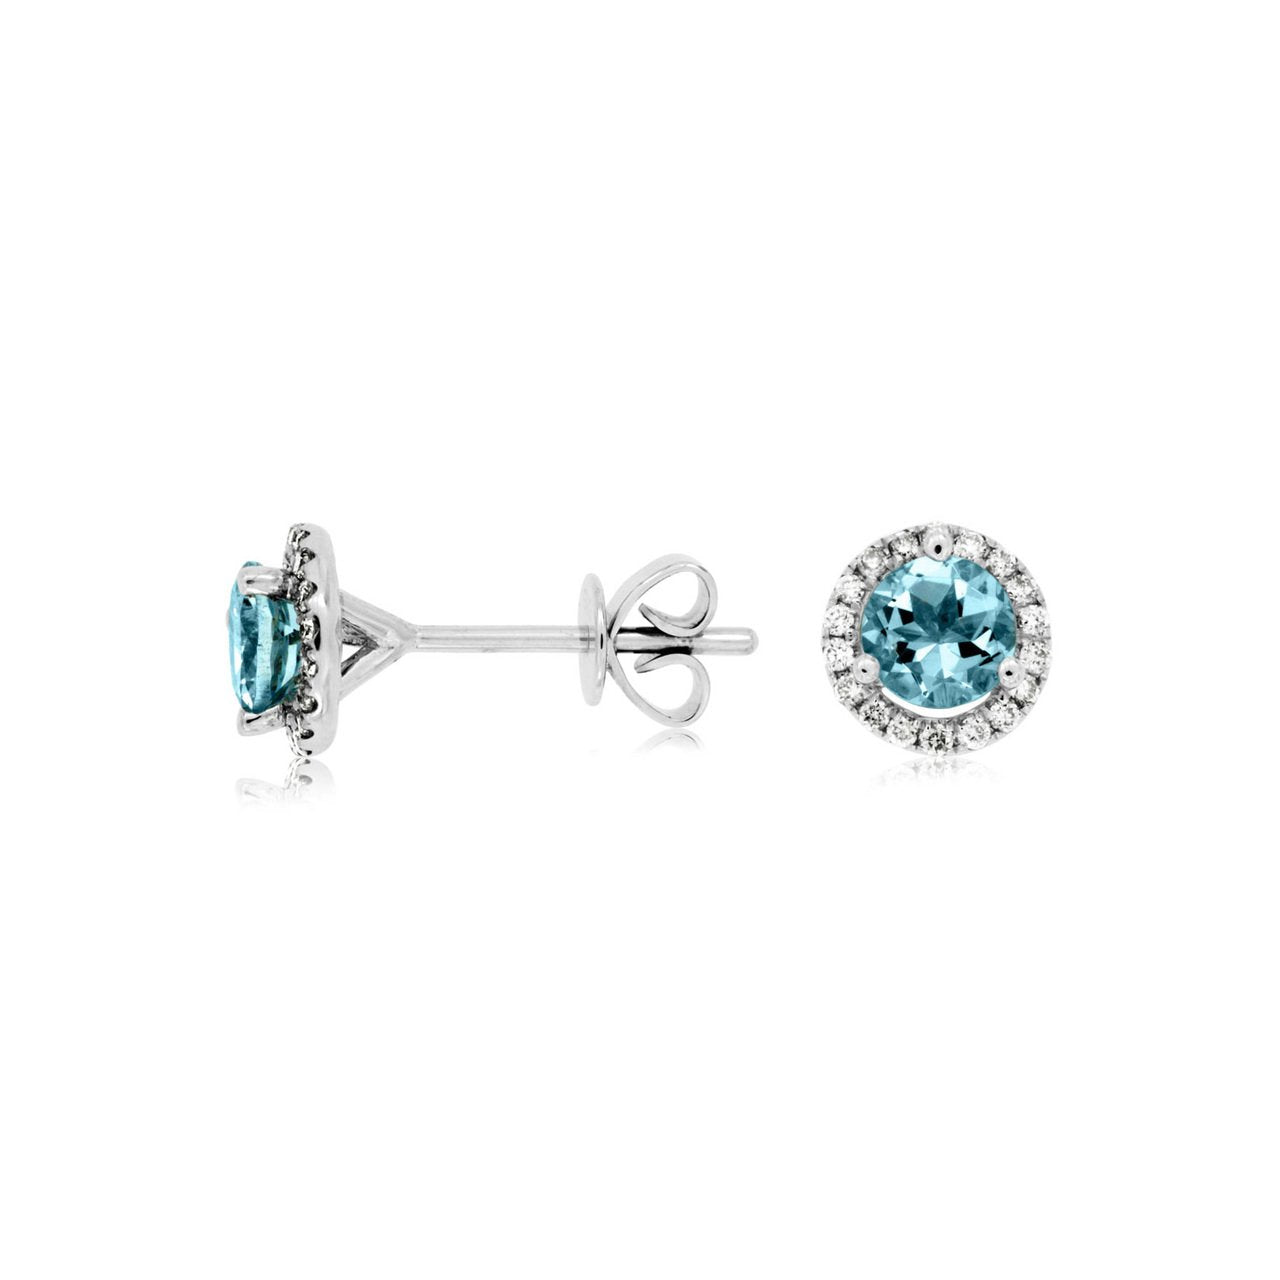 Sabel Collection 14K White Gold Aquamarine and Diamond Halo Stud Earrings